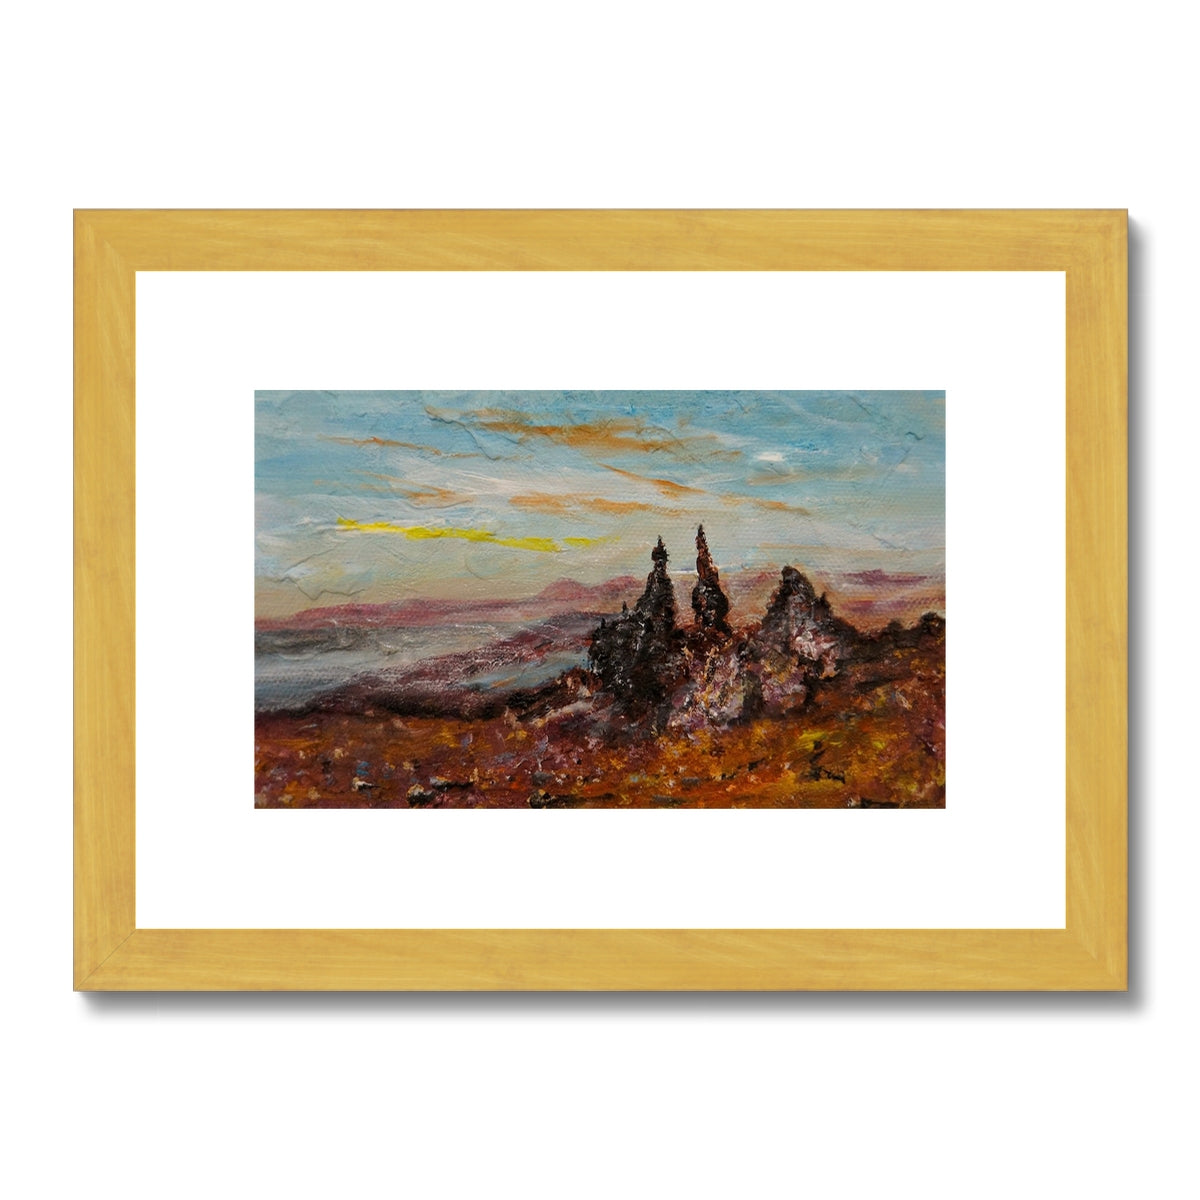 The Storr Skye Painting | Antique Framed & Mounted Prints From Scotland-Antique Framed & Mounted Prints-Skye Art Gallery-A4 Landscape-Gold Frame-Paintings, Prints, Homeware, Art Gifts From Scotland By Scottish Artist Kevin Hunter